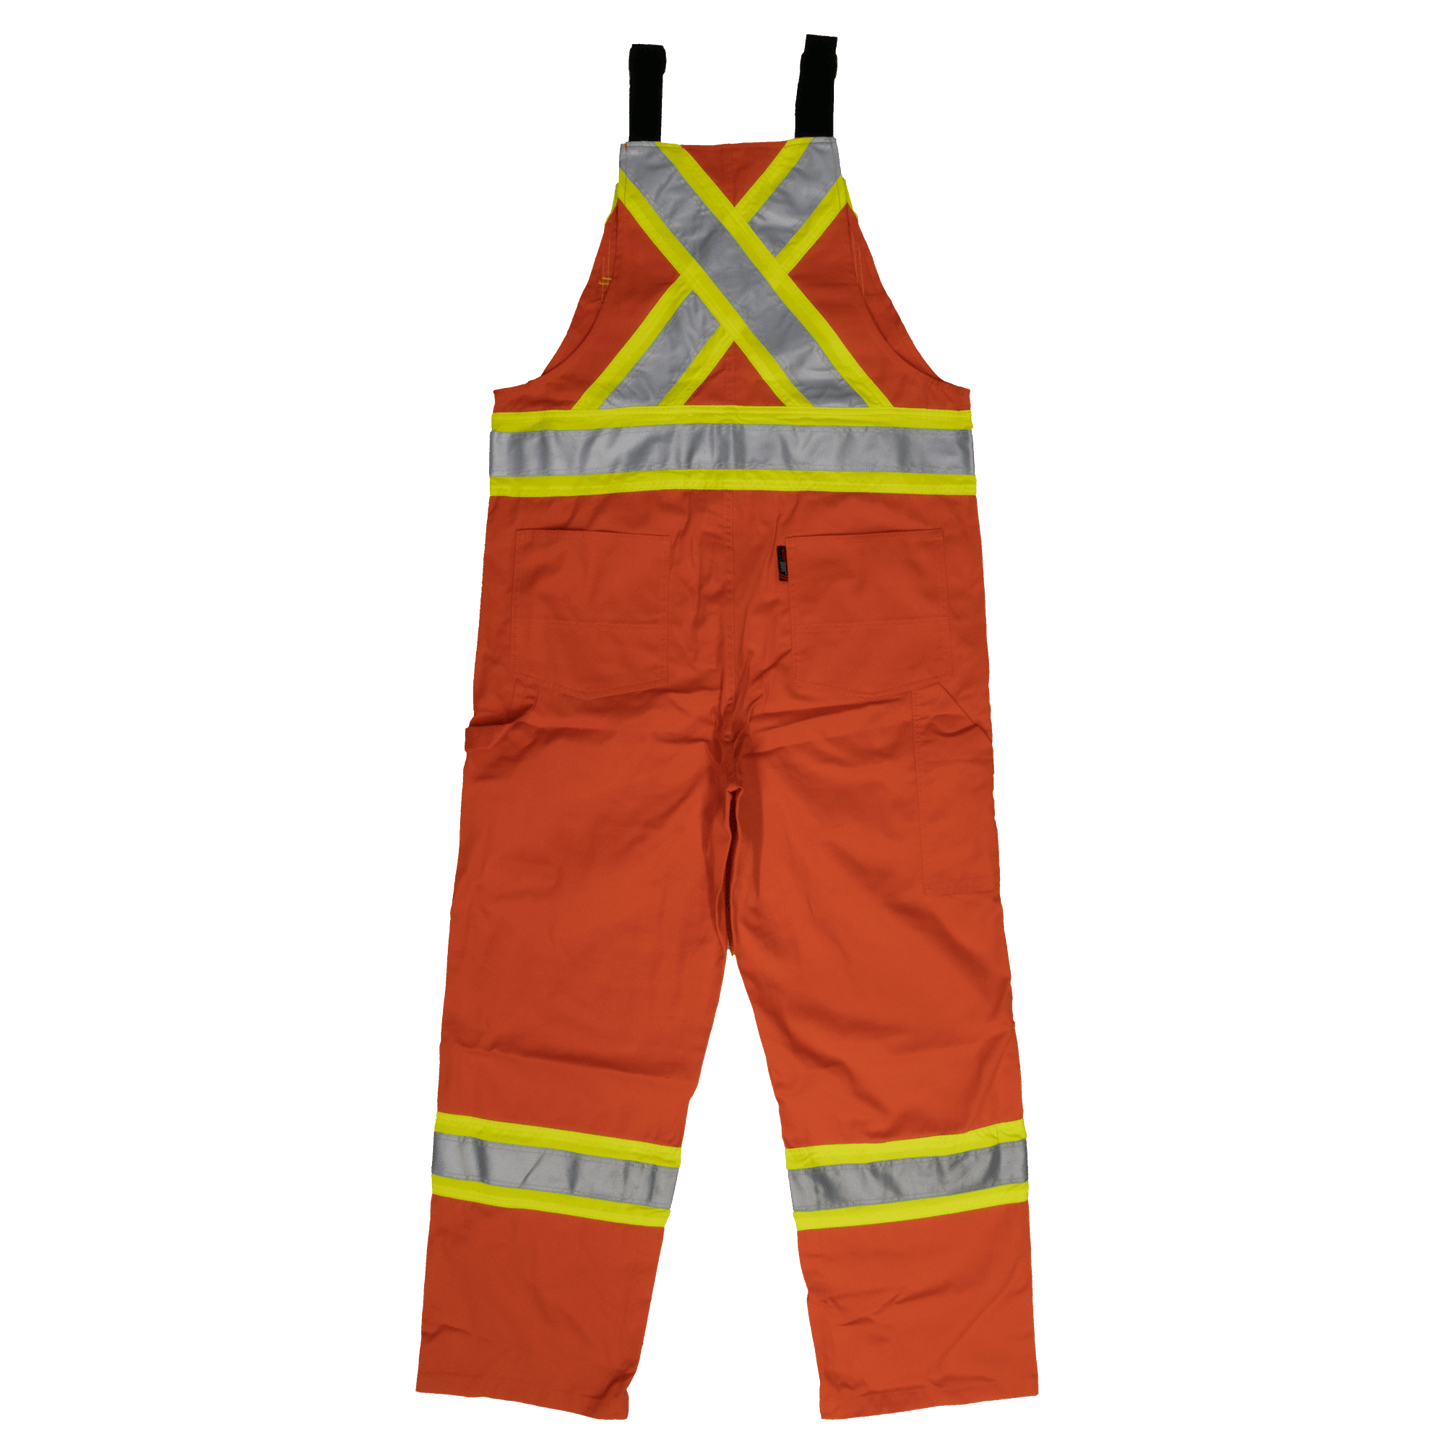 Tough Duck Unlined Safety Overall - S769 - Orange - back